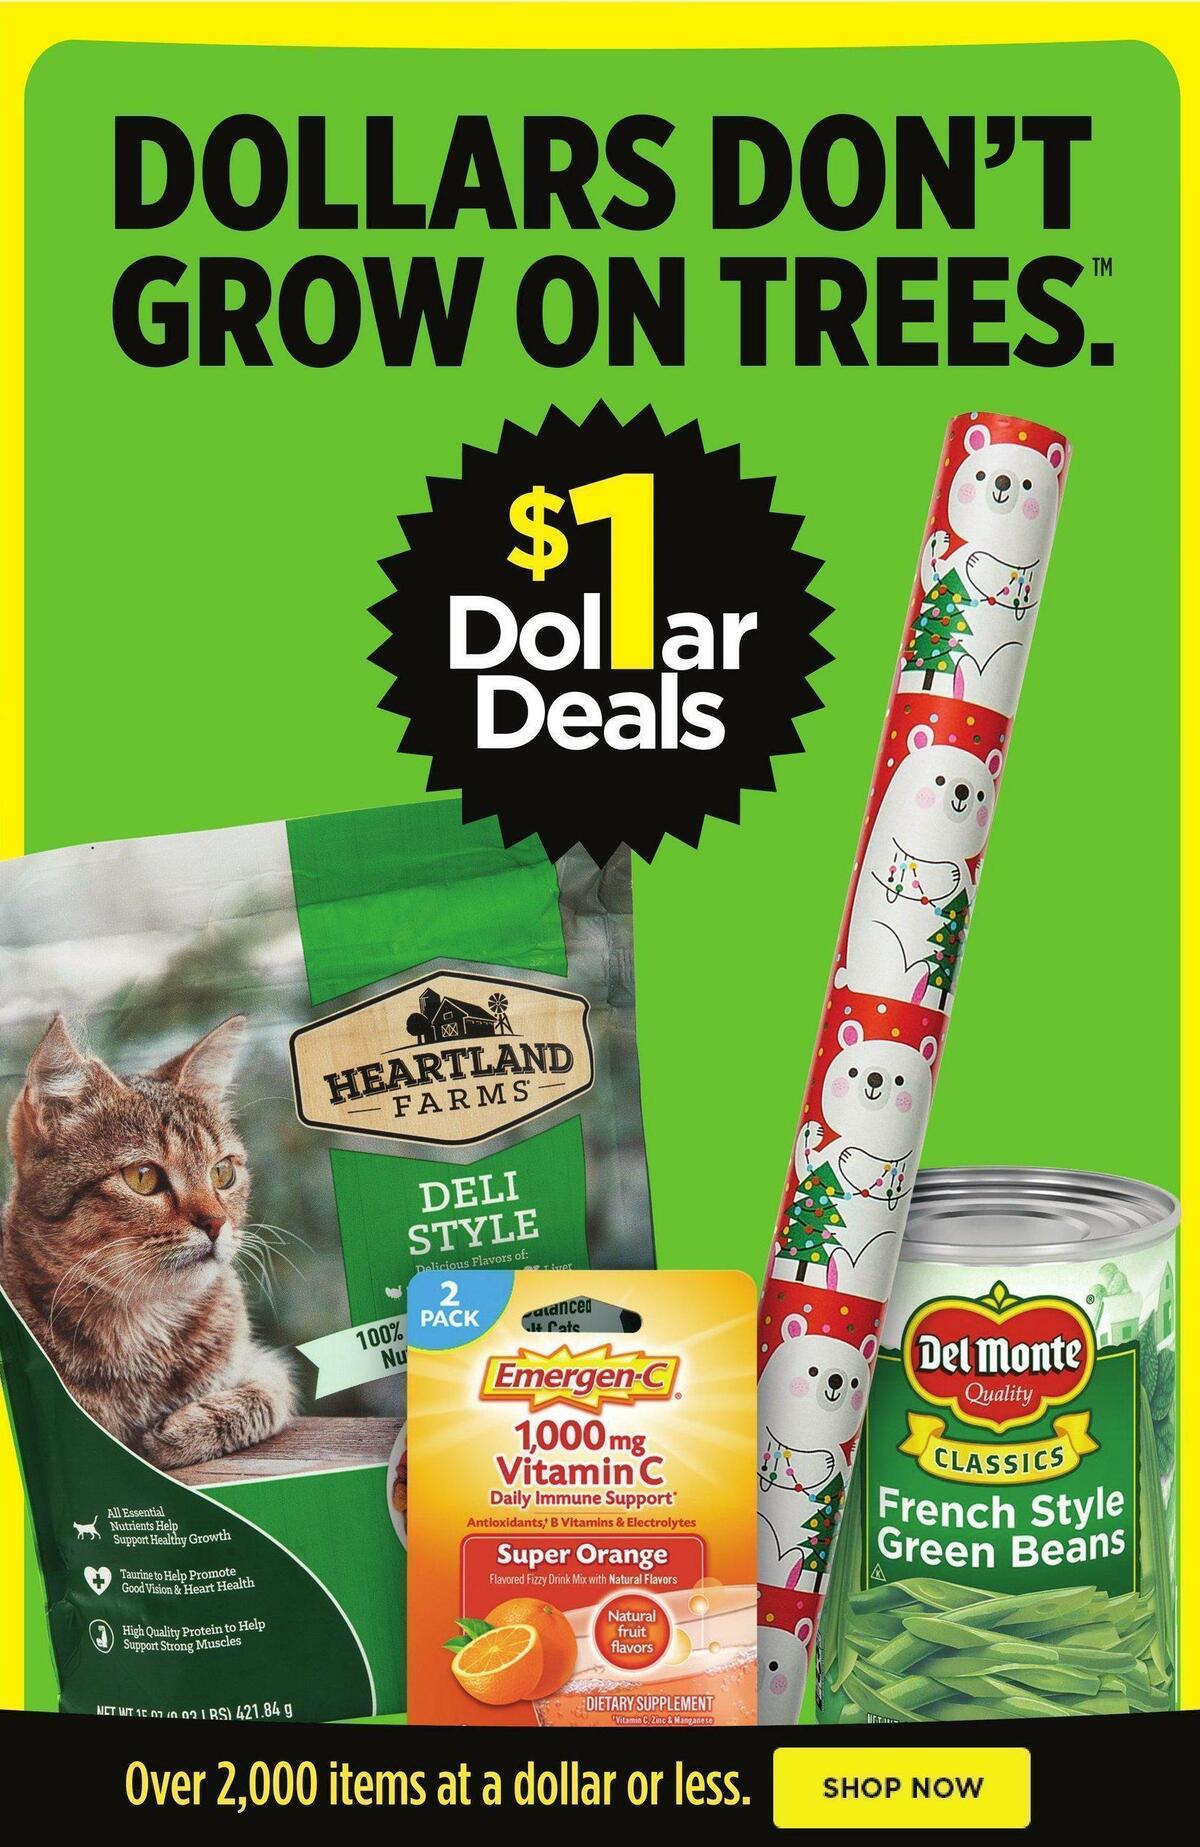 Dollar General Weekly Ad from December 4